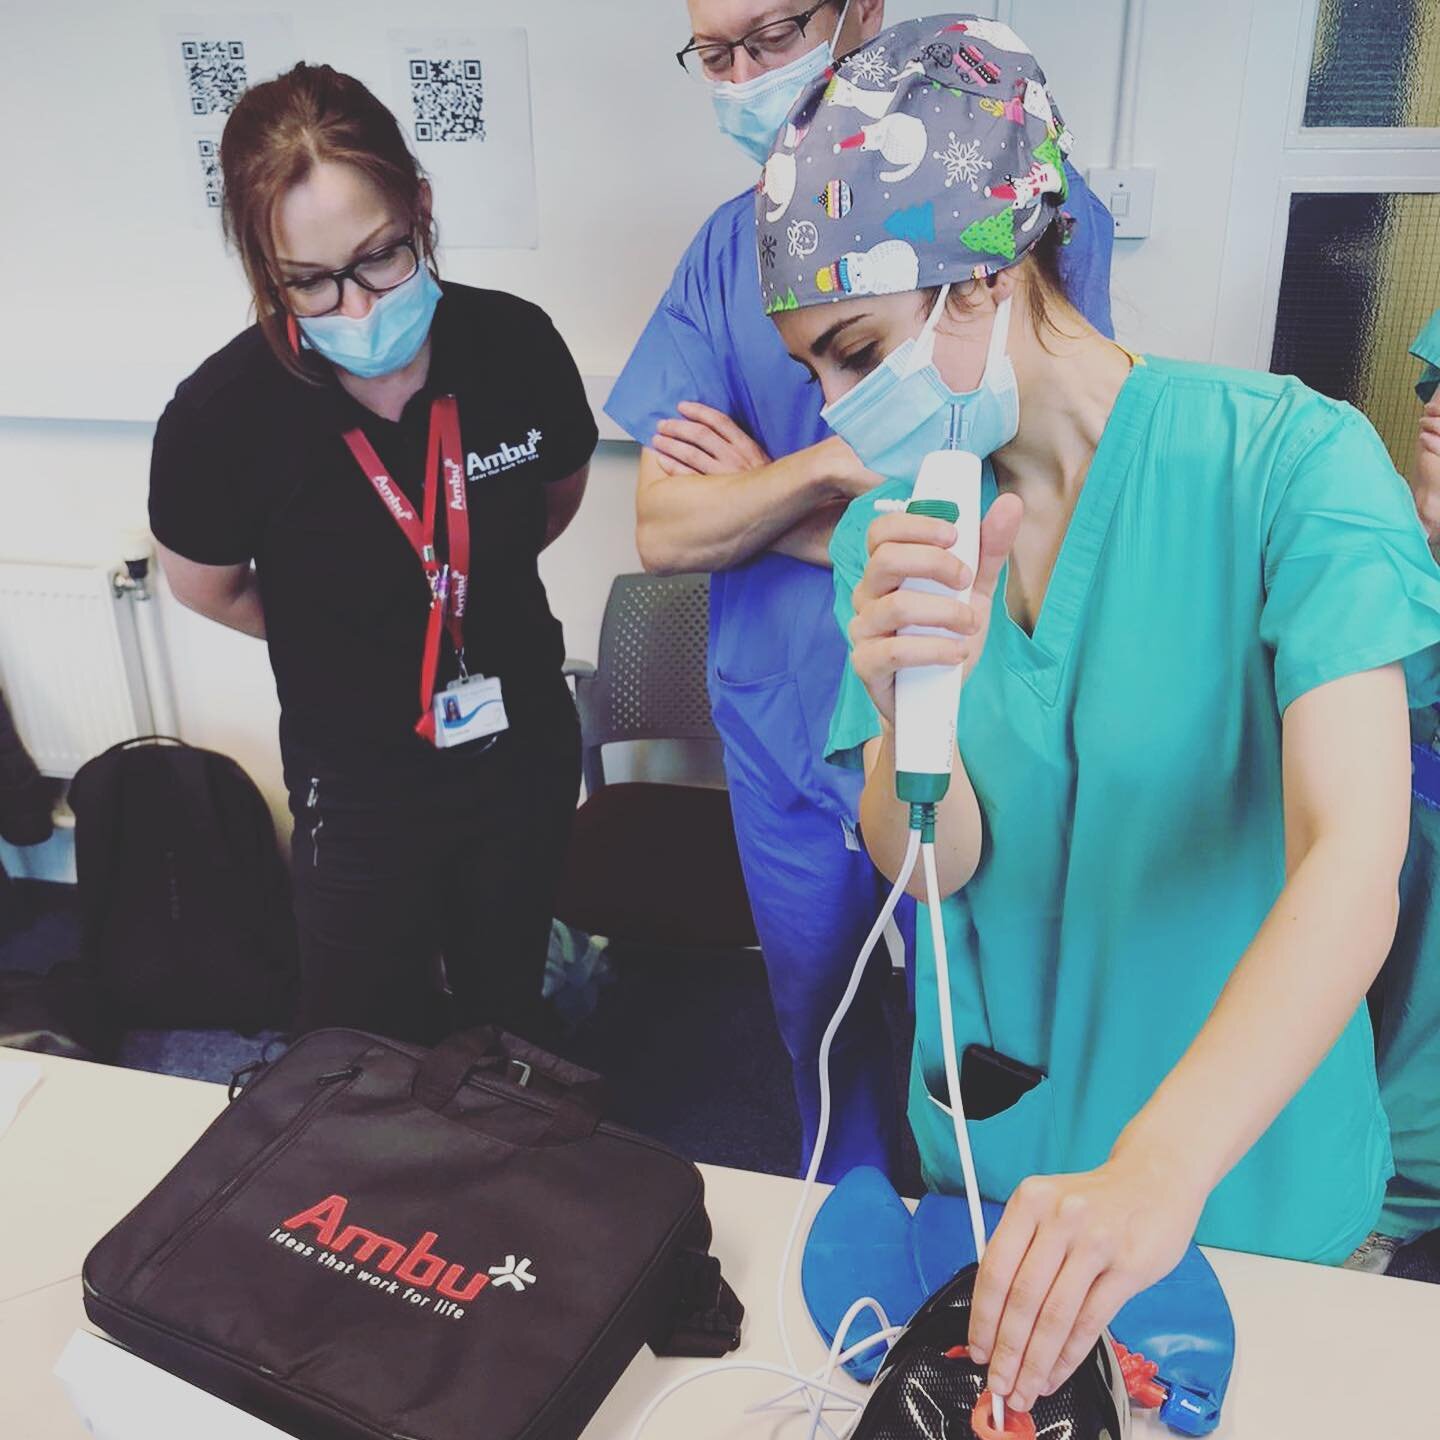 Thanks to @ambu_uk for their sponsorship of our recent human factors course and the amazing staff and simulation fellows at the Centre for Simulation and Patient Safety, Aintree.